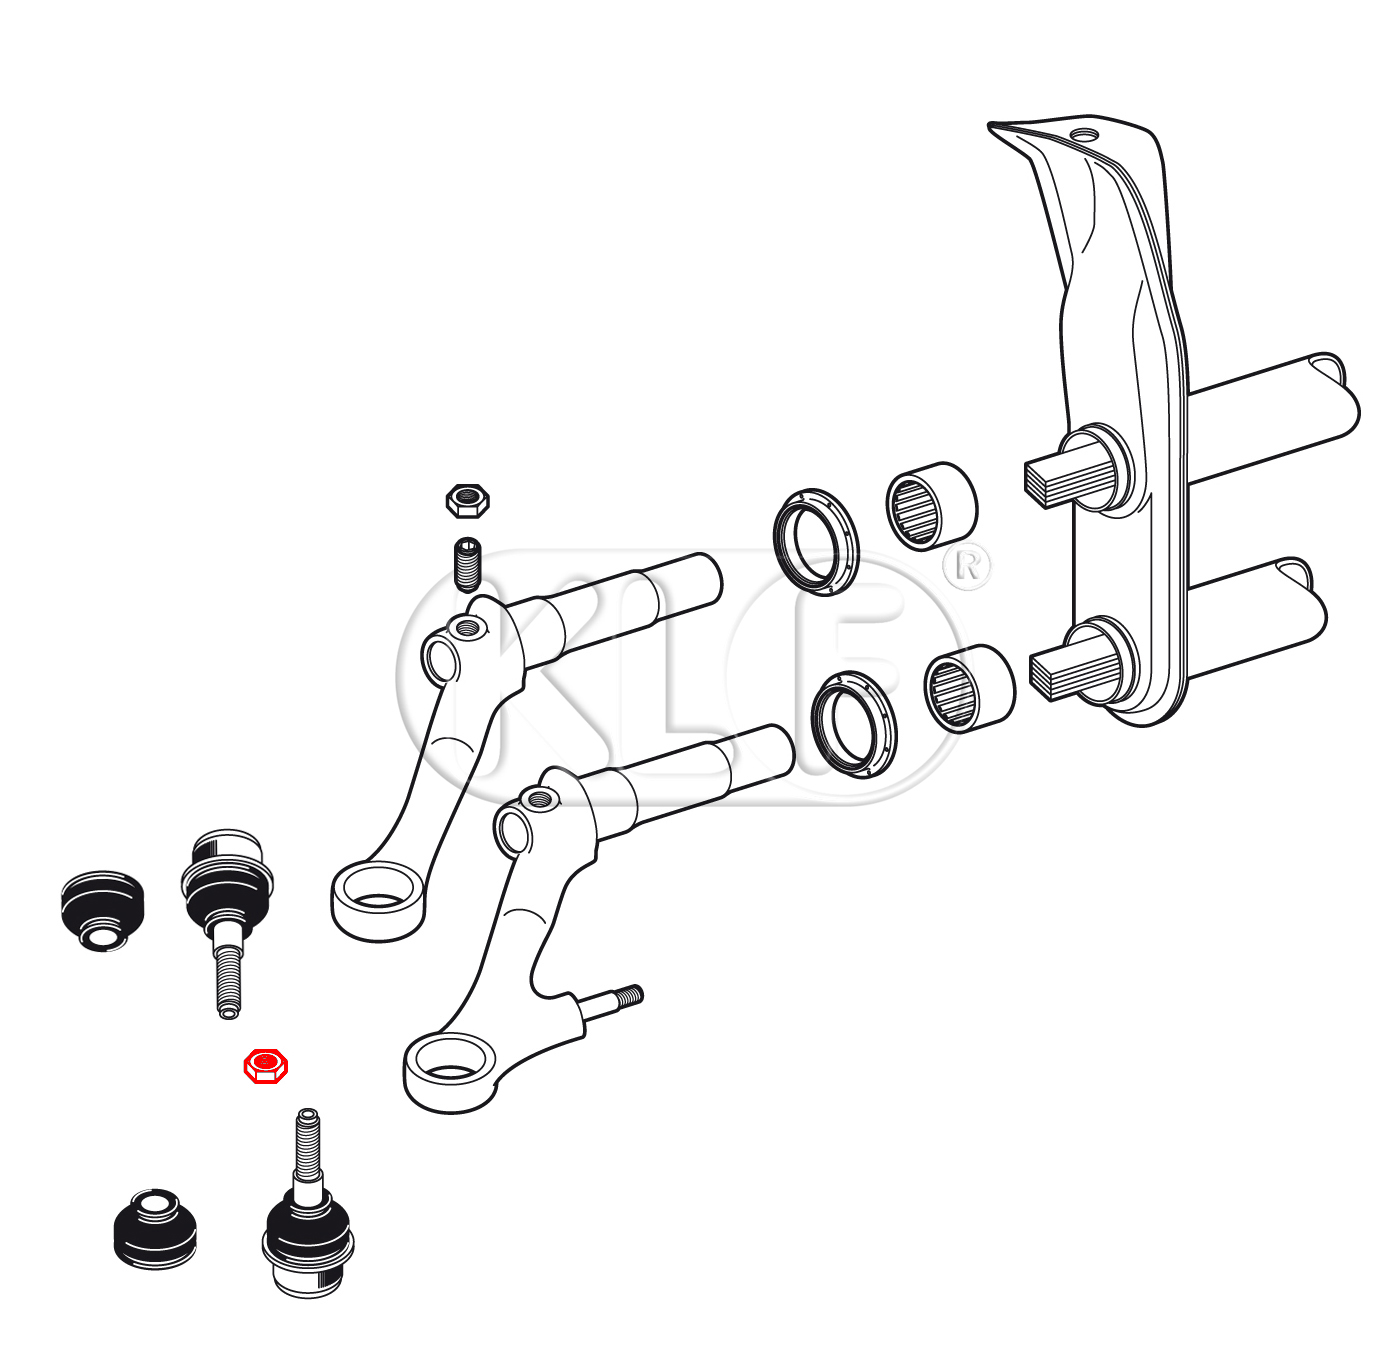 Nut M12 x 1,5 for Ball Joint year 8/65 on and sway bar for front axle  1302/1303